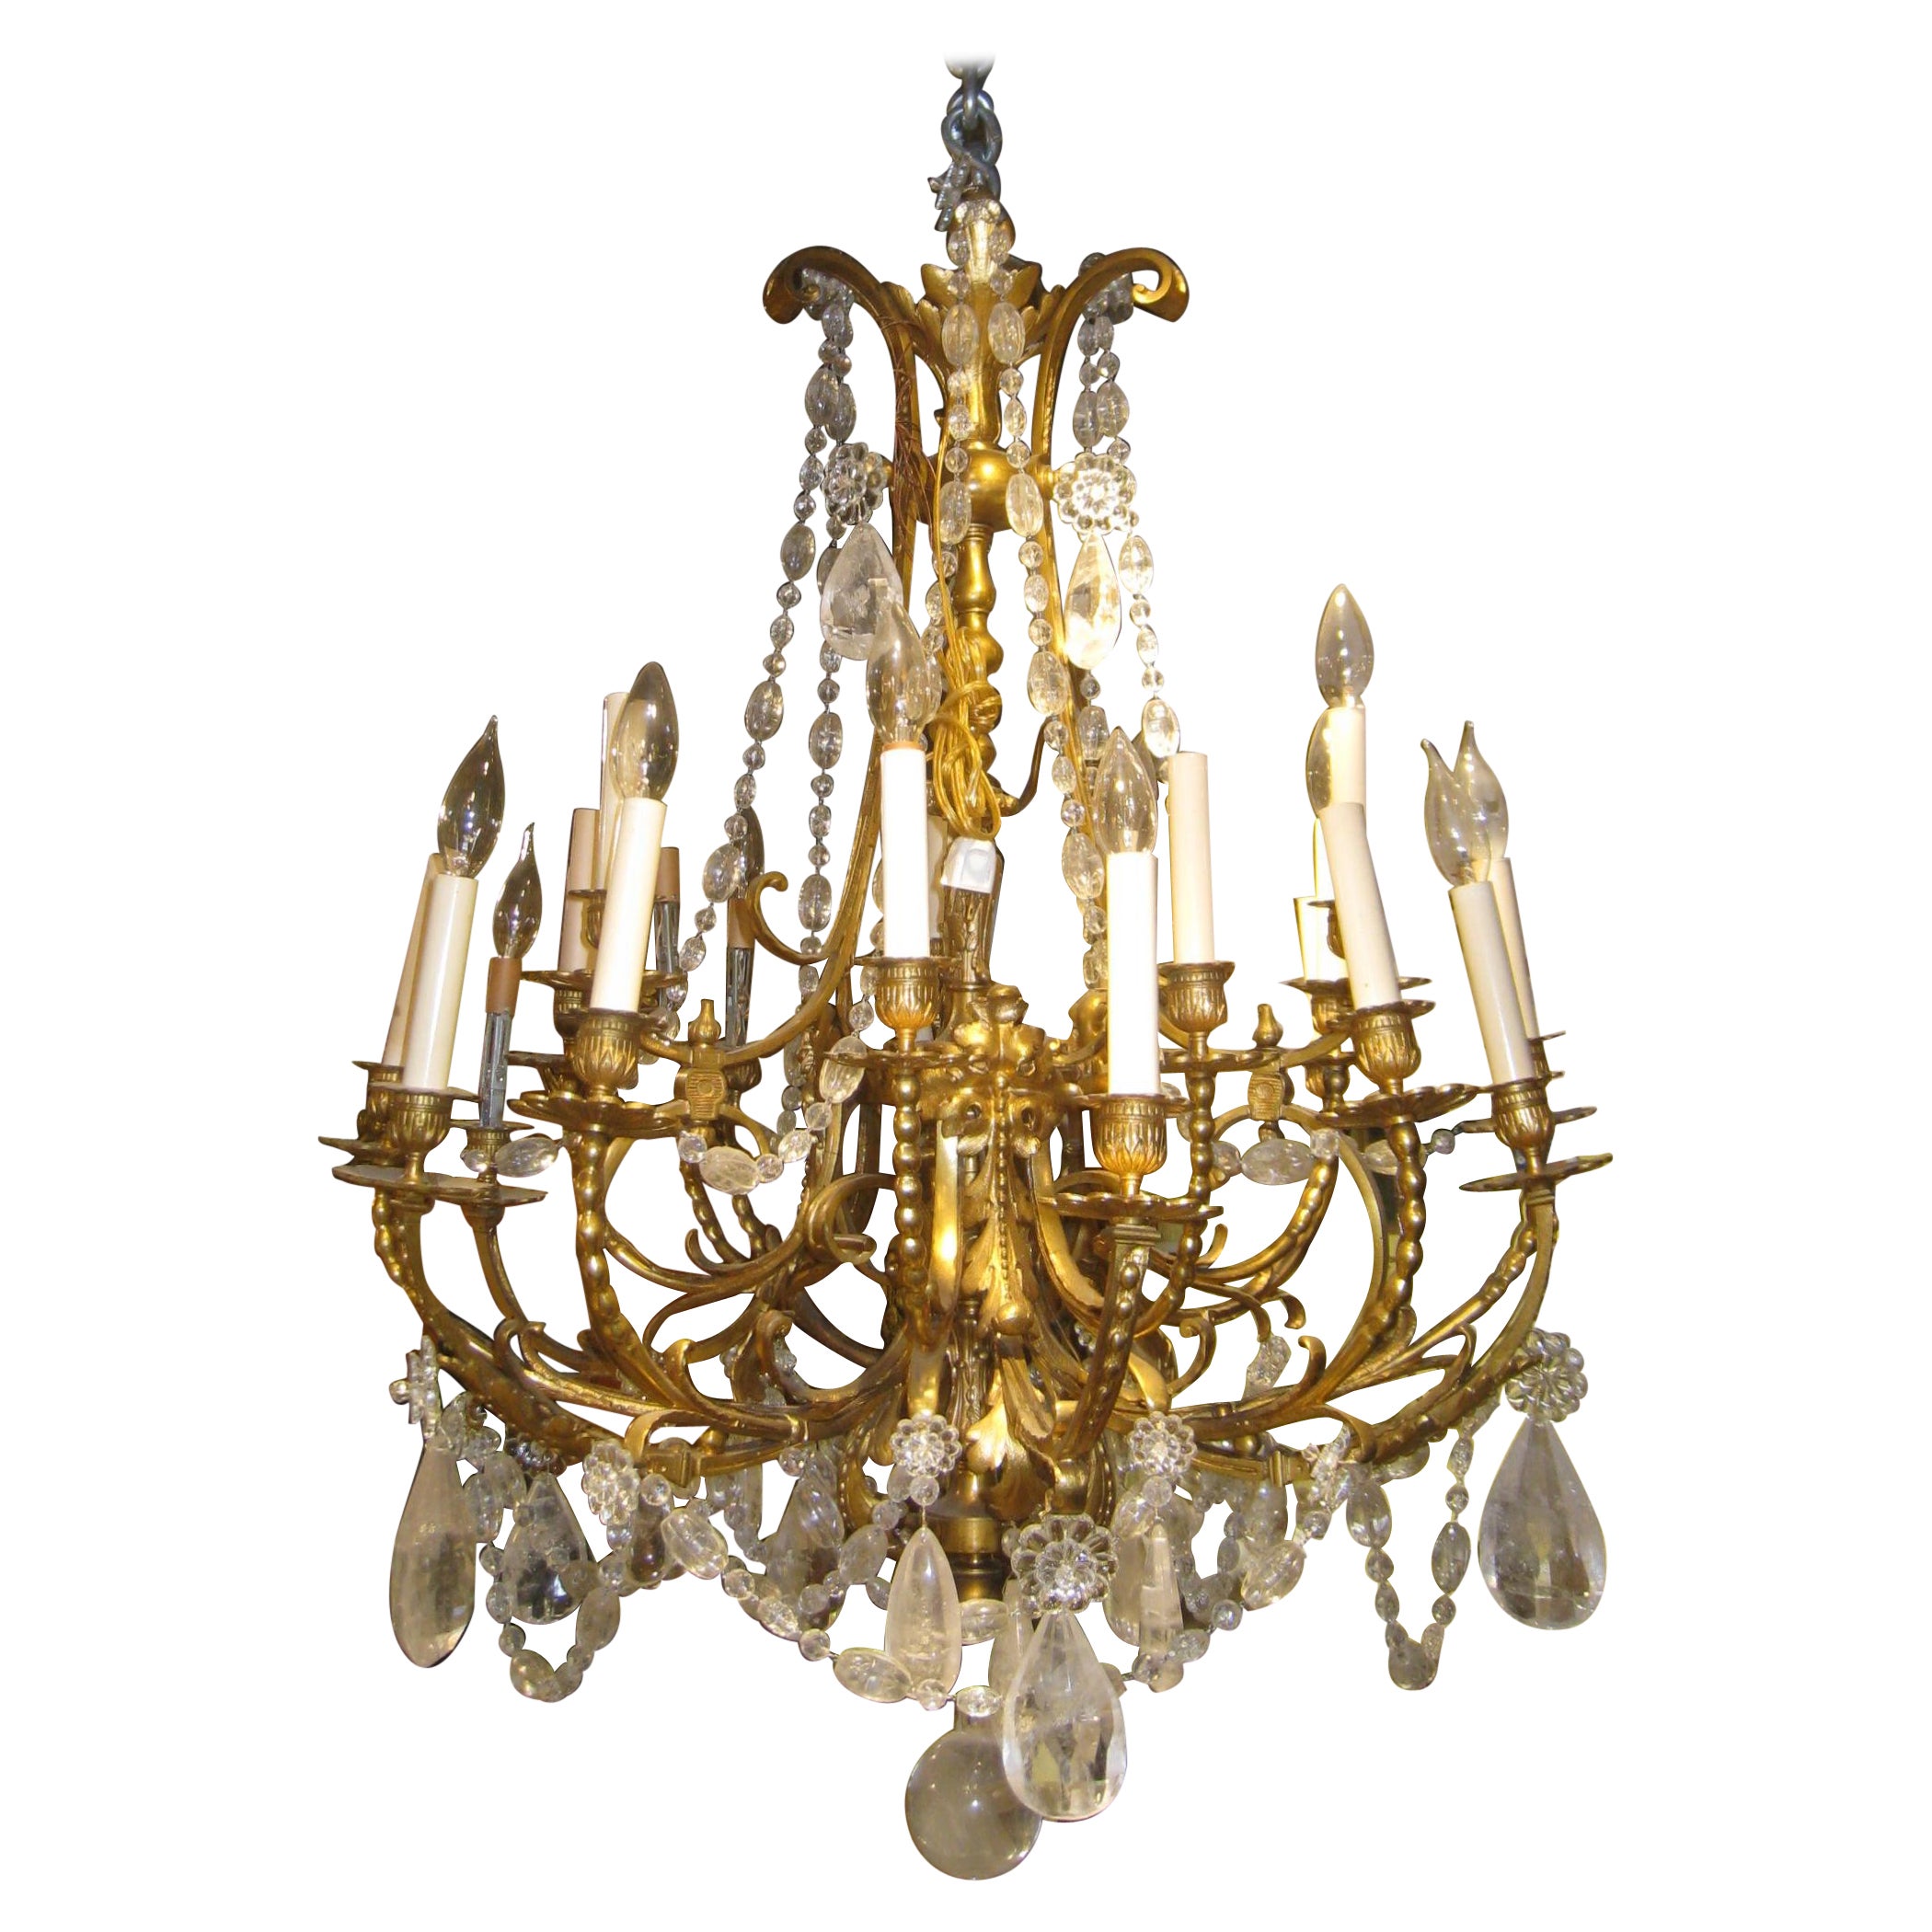 French 19th C Louis XV XVI Style 16 Light Bronze Chandelier with Rock Crystal For Sale